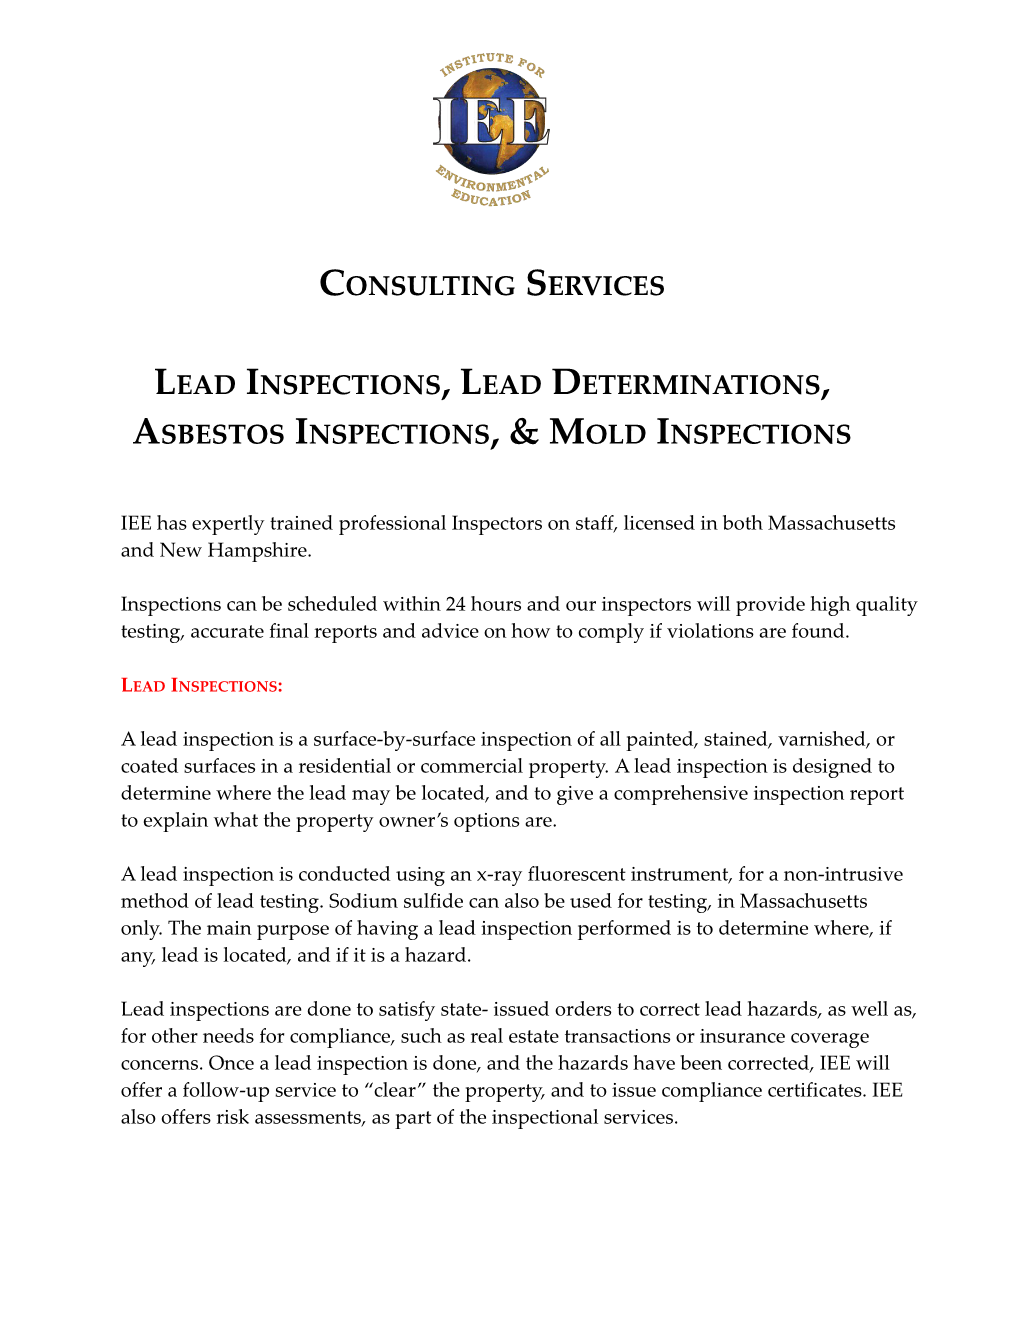 Lead Inspections, Lead Determinations